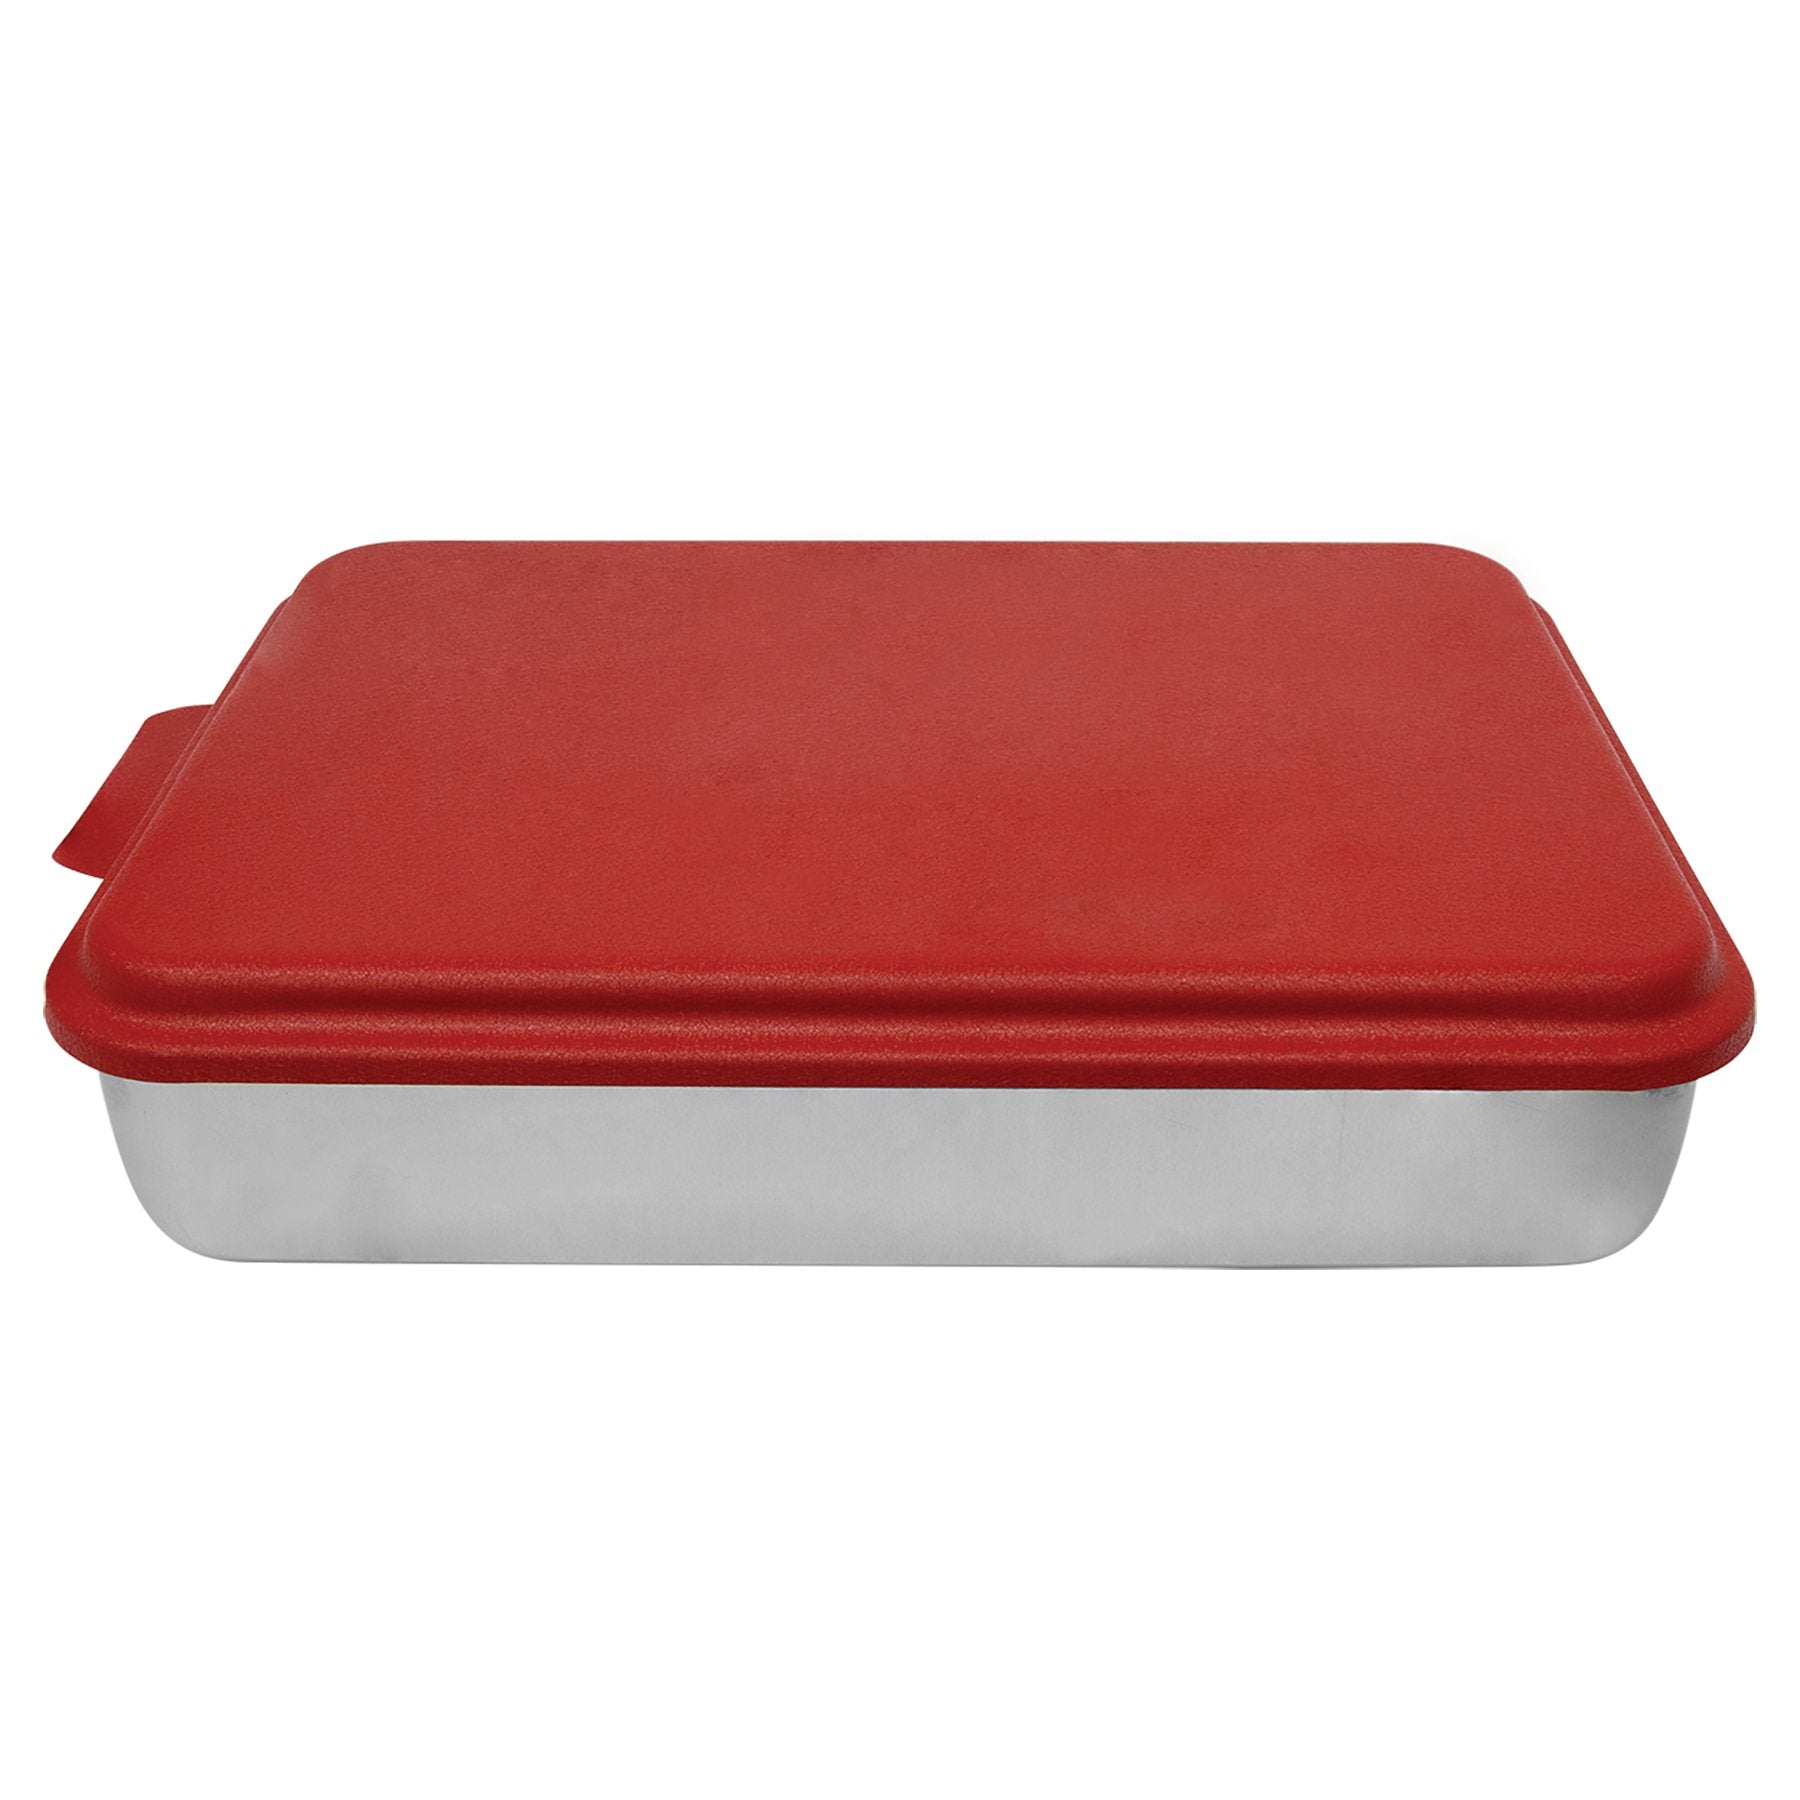 Personalized 9x13 Cake Pan with snap-on Lid – Etchified